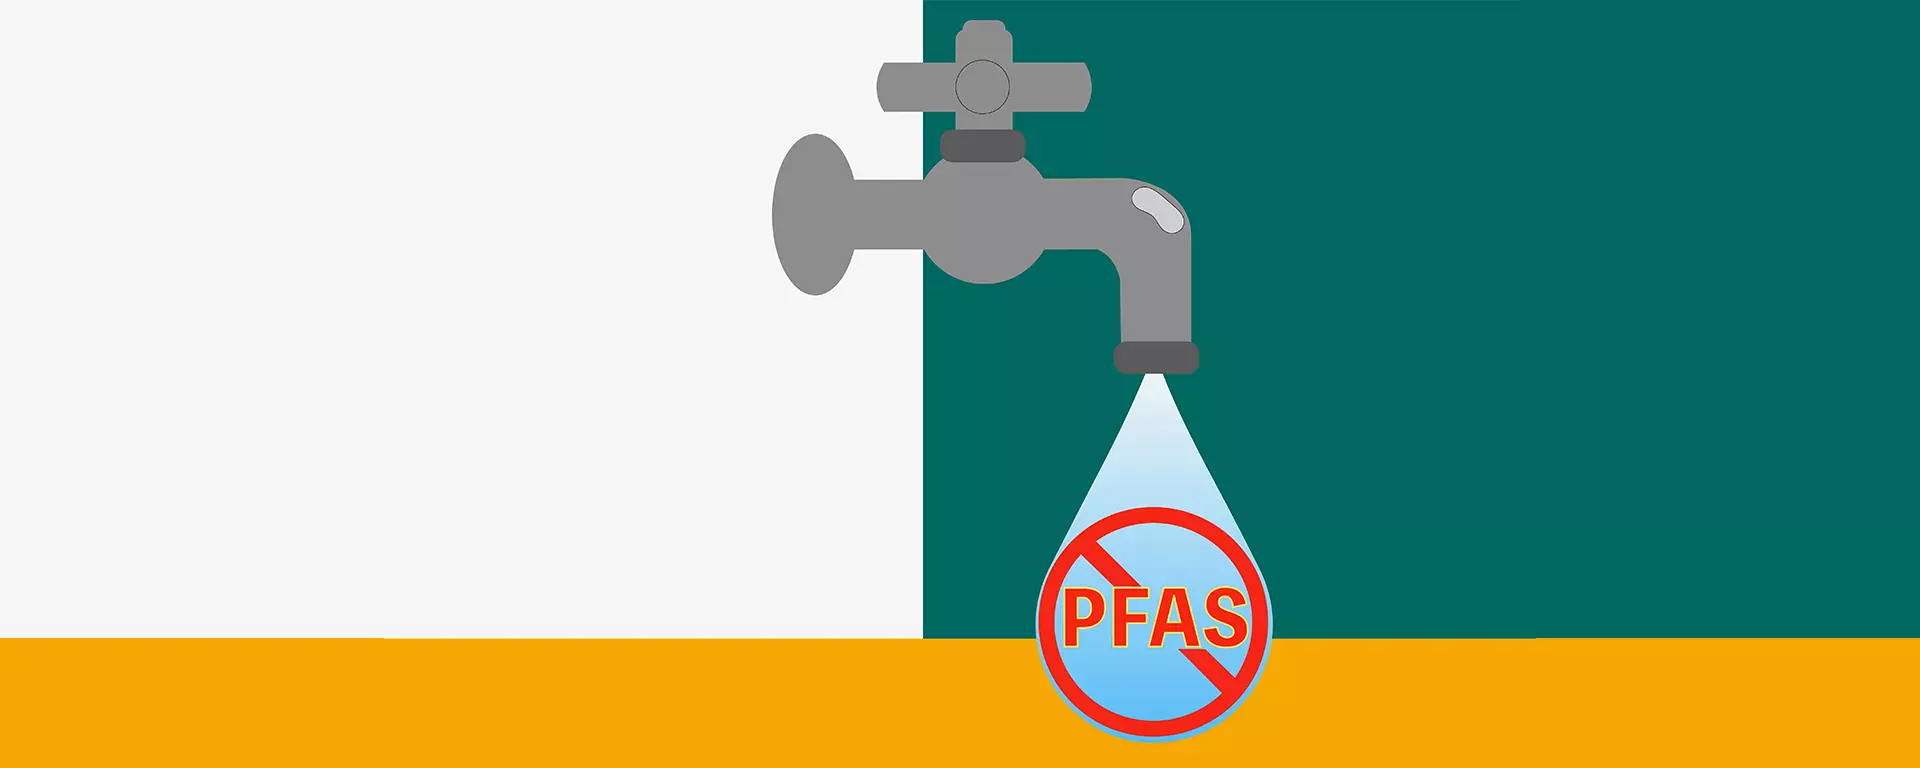 A water faucet and PFAS